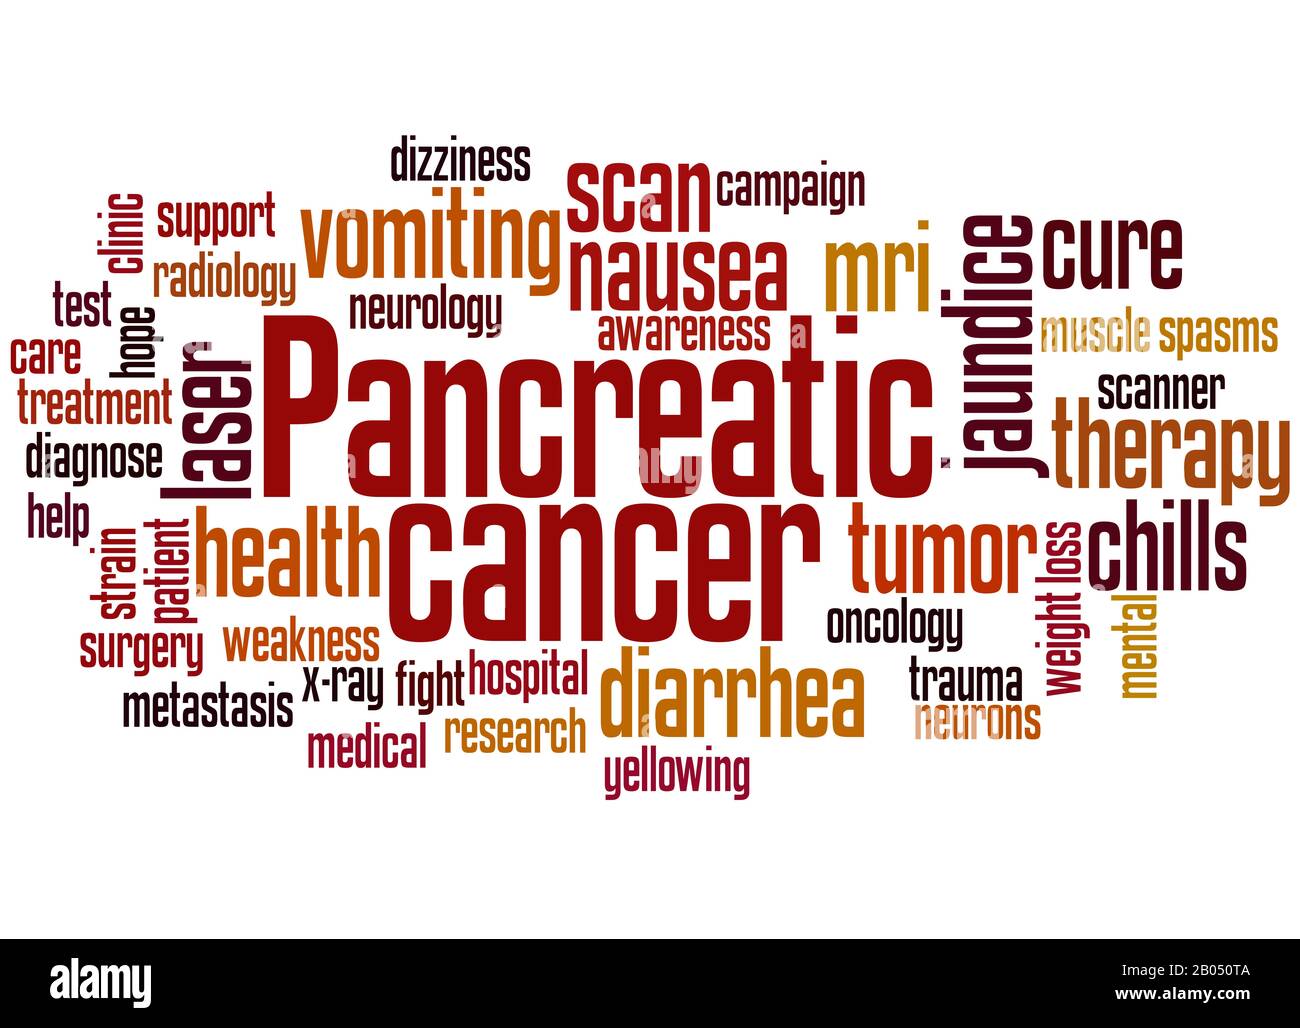 Pancreatic cancer word cloud concept on white background. Stock Photo